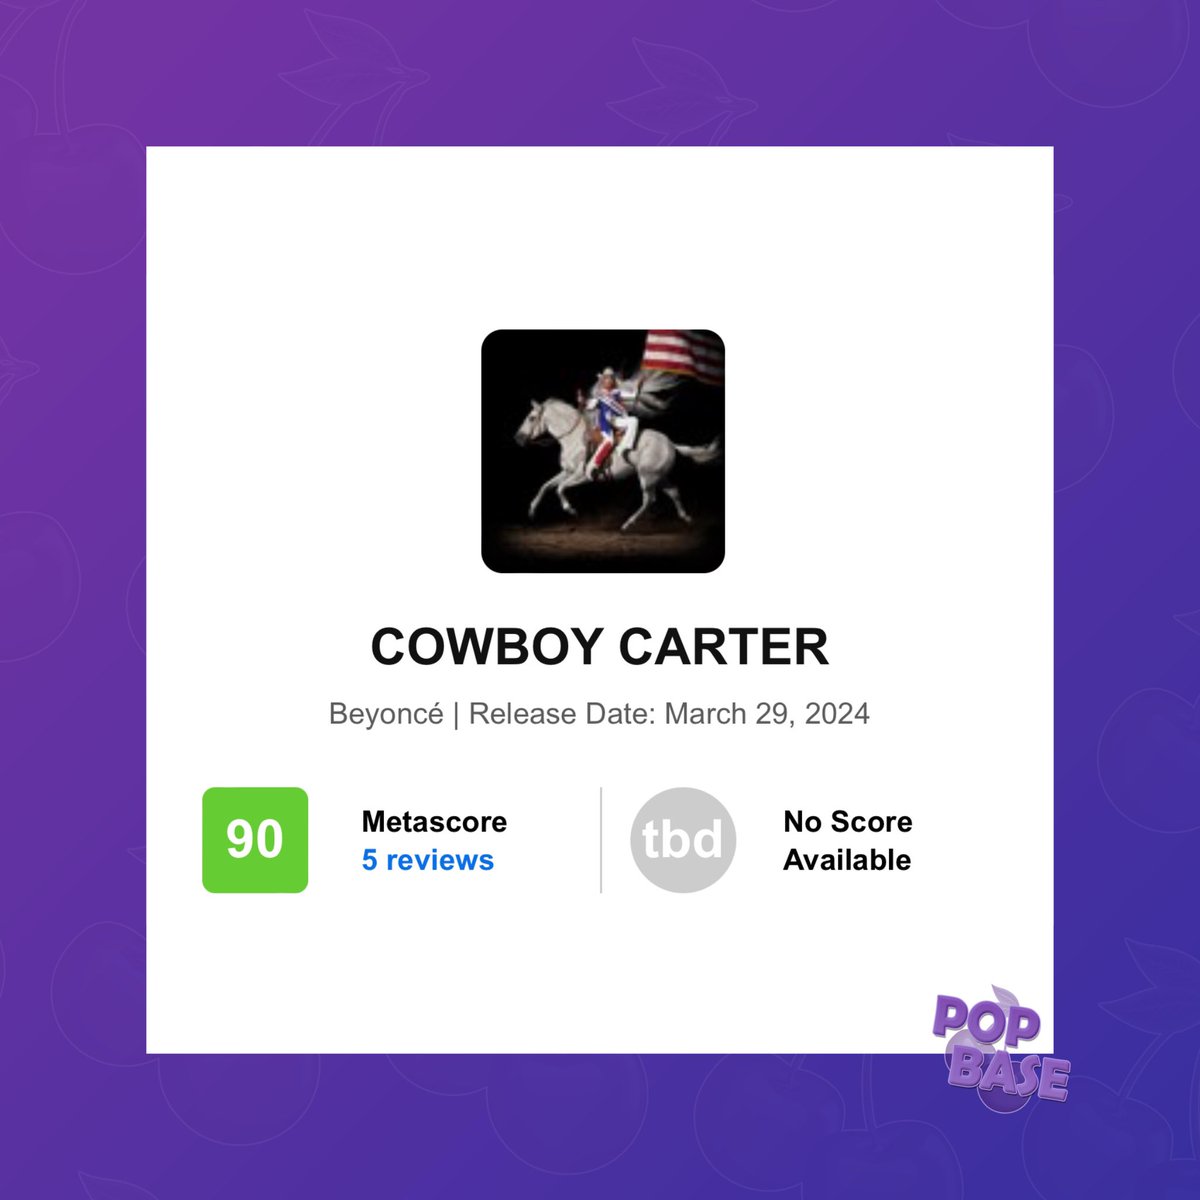 ‘COWBOY CARTER’ by Beyoncé debuts with a Metacritic score of 90. It's currently the most acclaimed album of 2024.